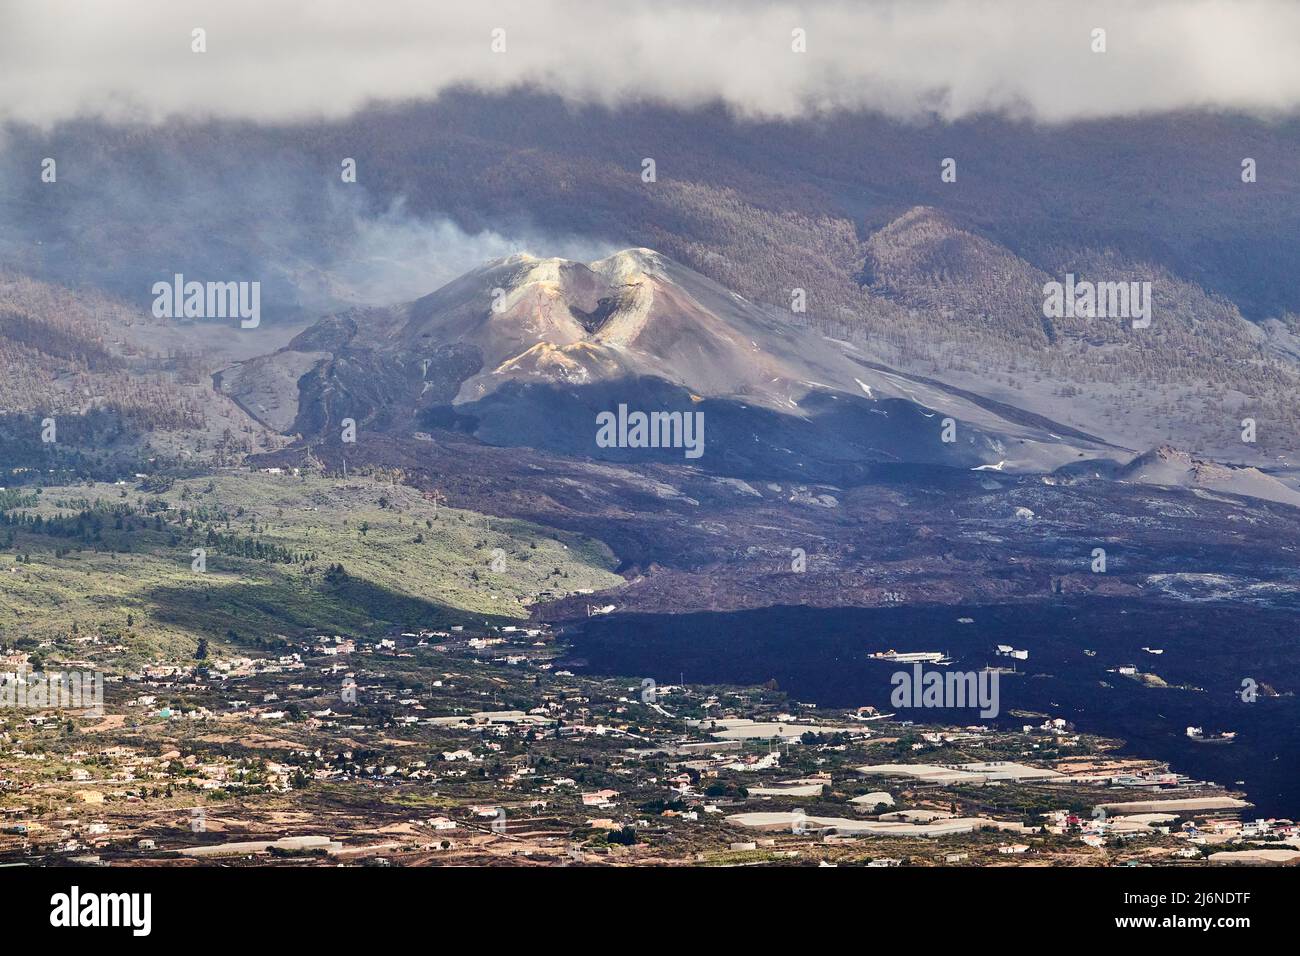 In The Foreground The Village Of El Paso, In The Background A Smoking Still Nameless Volcanic Crater With Sulfur Deposits And Black Magma Flows. El Pa Stock Photo